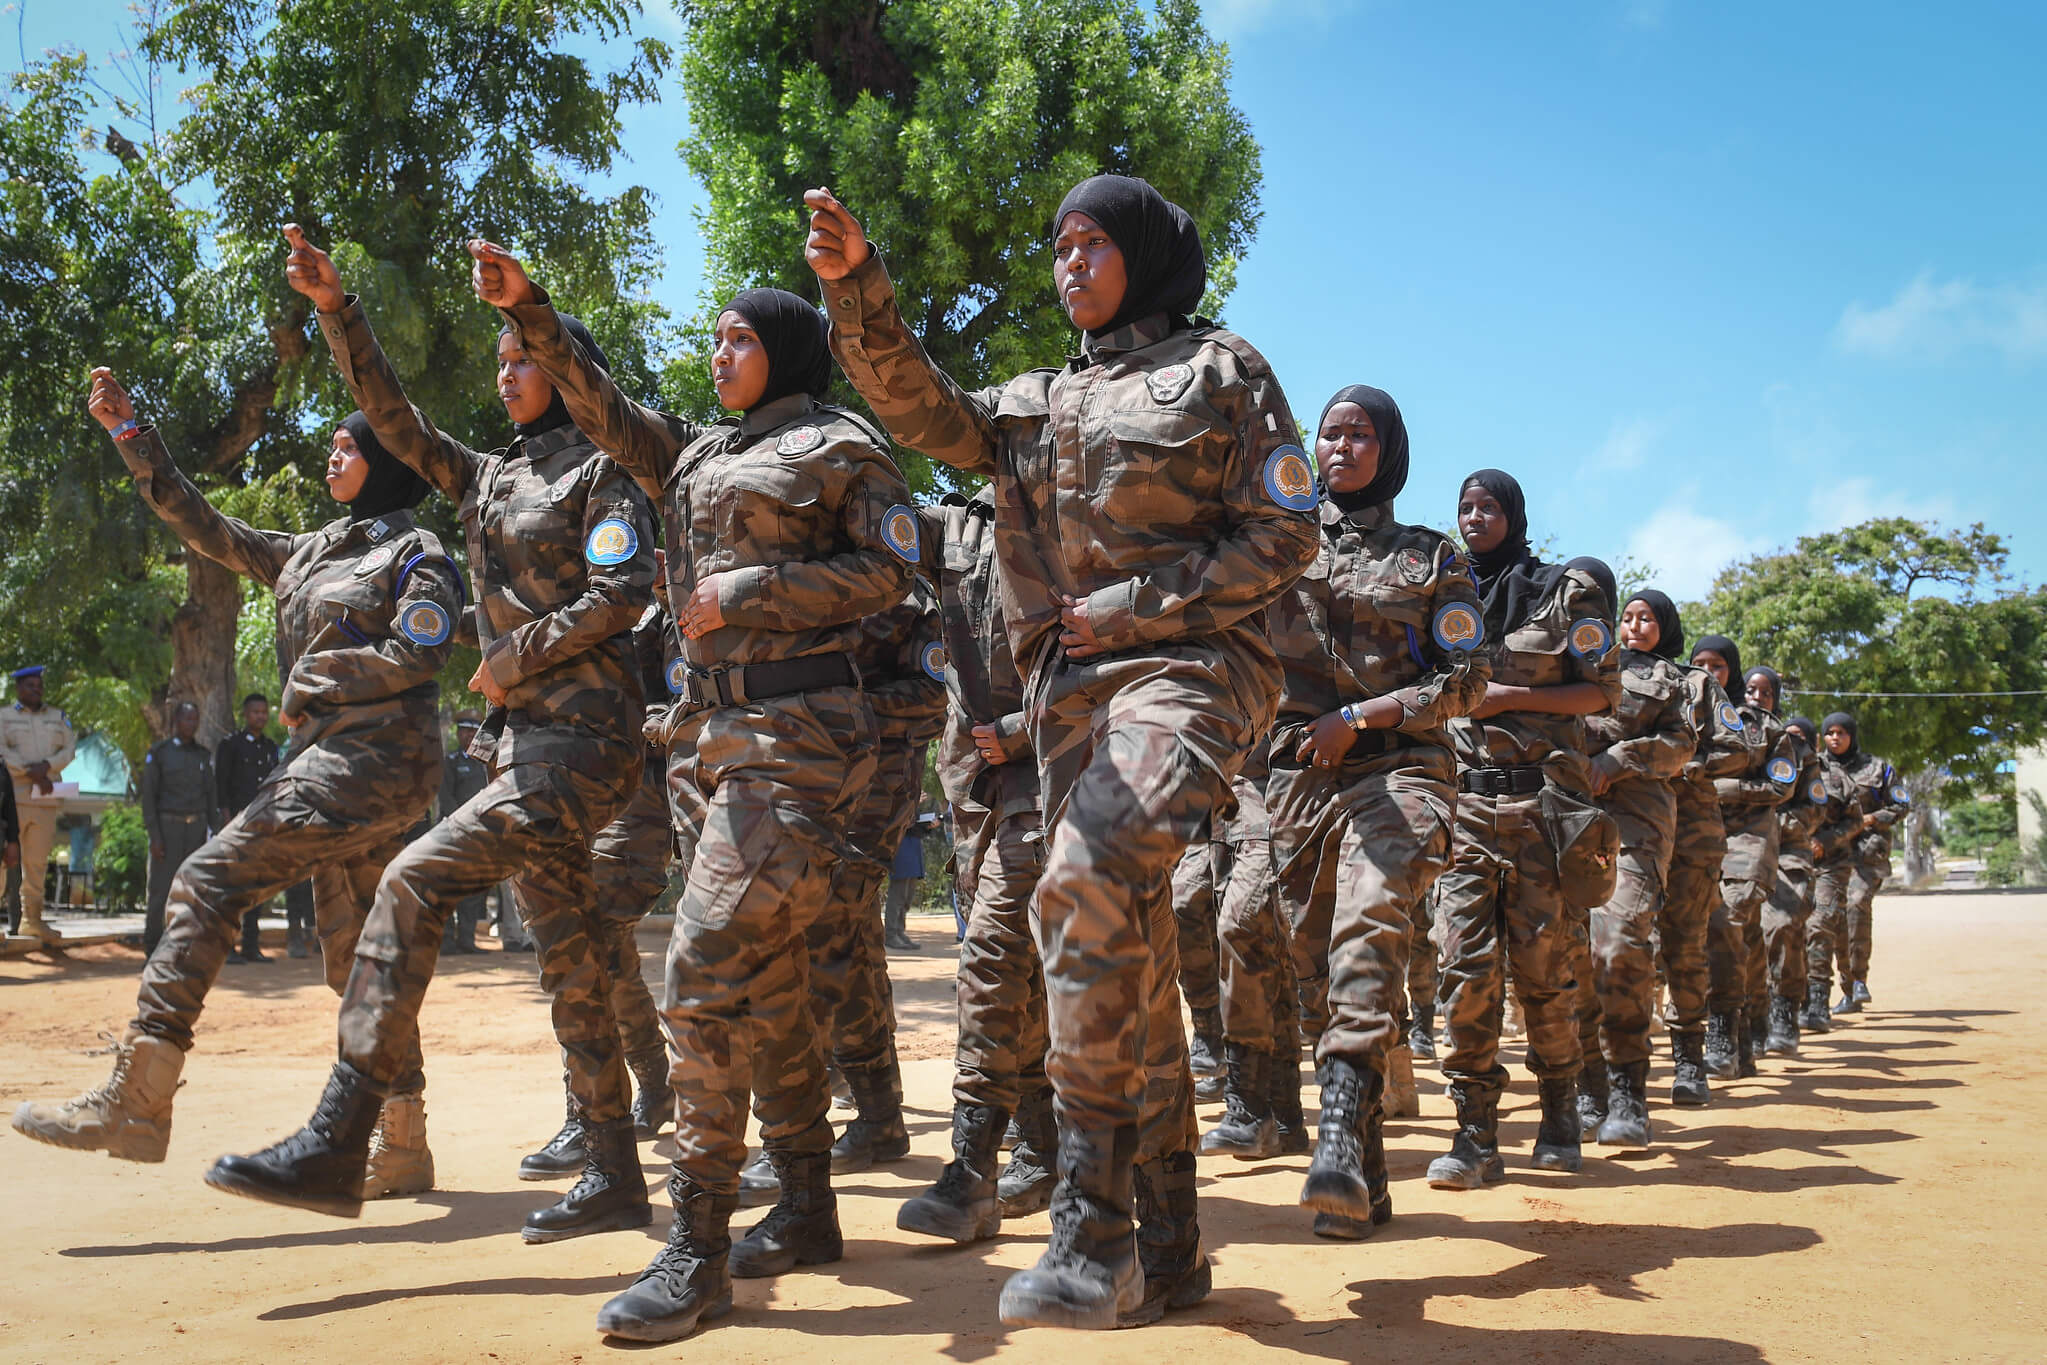 An all women special unit in Somali Police force, match during a graduation ceremony in Mogadishu, Somalia in October 2021. © AMISOM Public Information - Flickr 